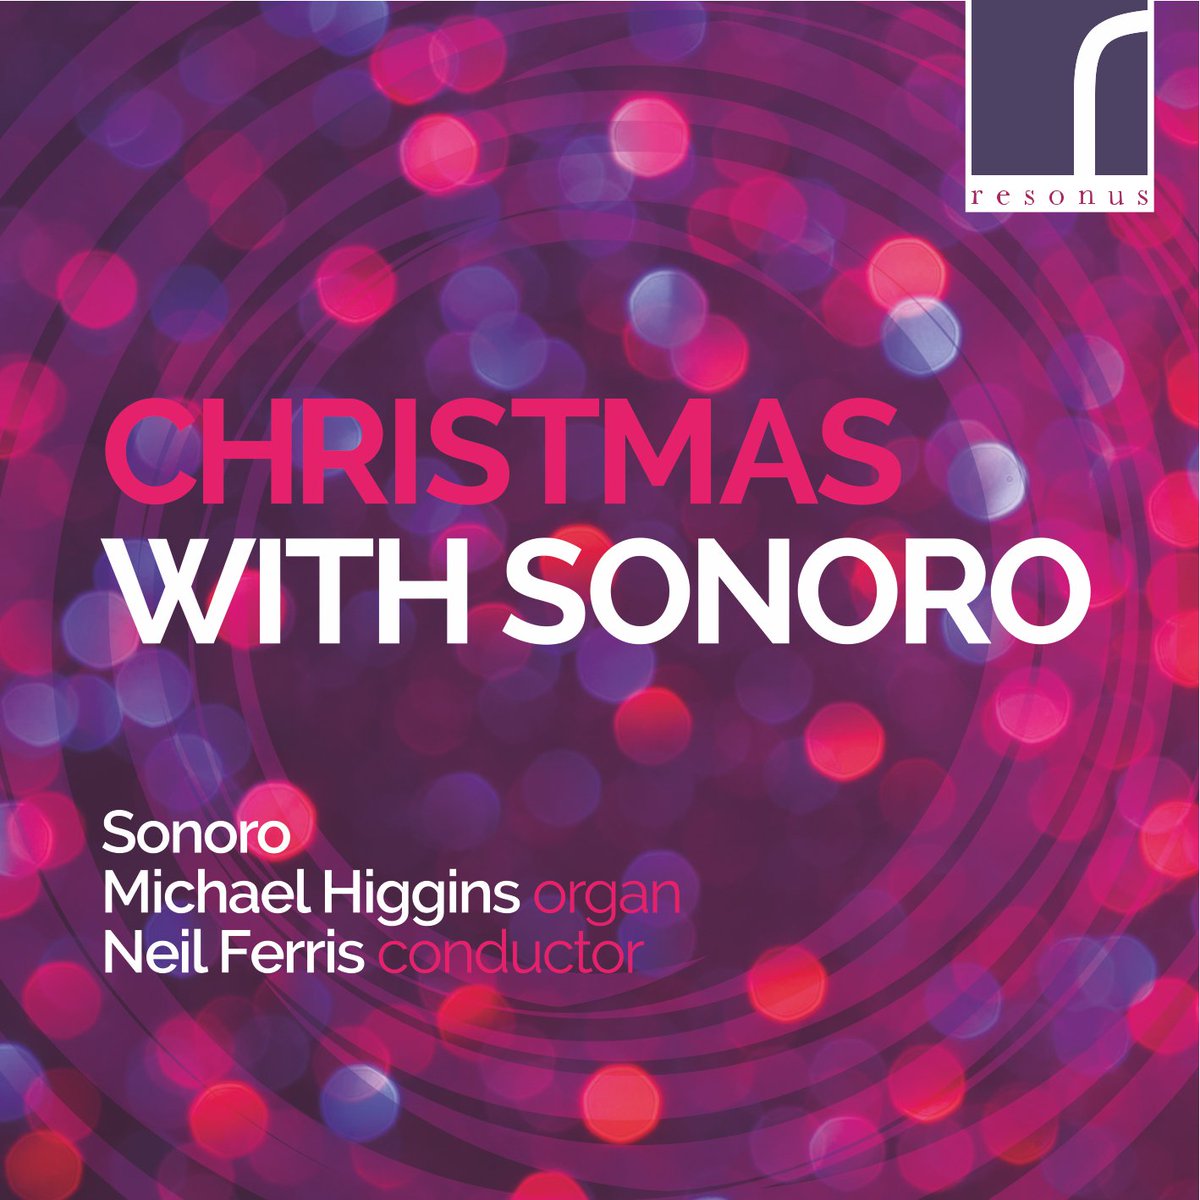 “Outstandingly refreshing” ★★★★★ & @MusicMagazine’s ‘Christmas Choice’, #ChristmasWithSonoro @resonusclassics is available now with #festivefavourites by @MalcolmArcher52 @PaulSpicer6 @mrhiggins81 @joubertcomposer @GarethTreseder @sfbeamish @johnmrutter & @Will_Todd_Music.